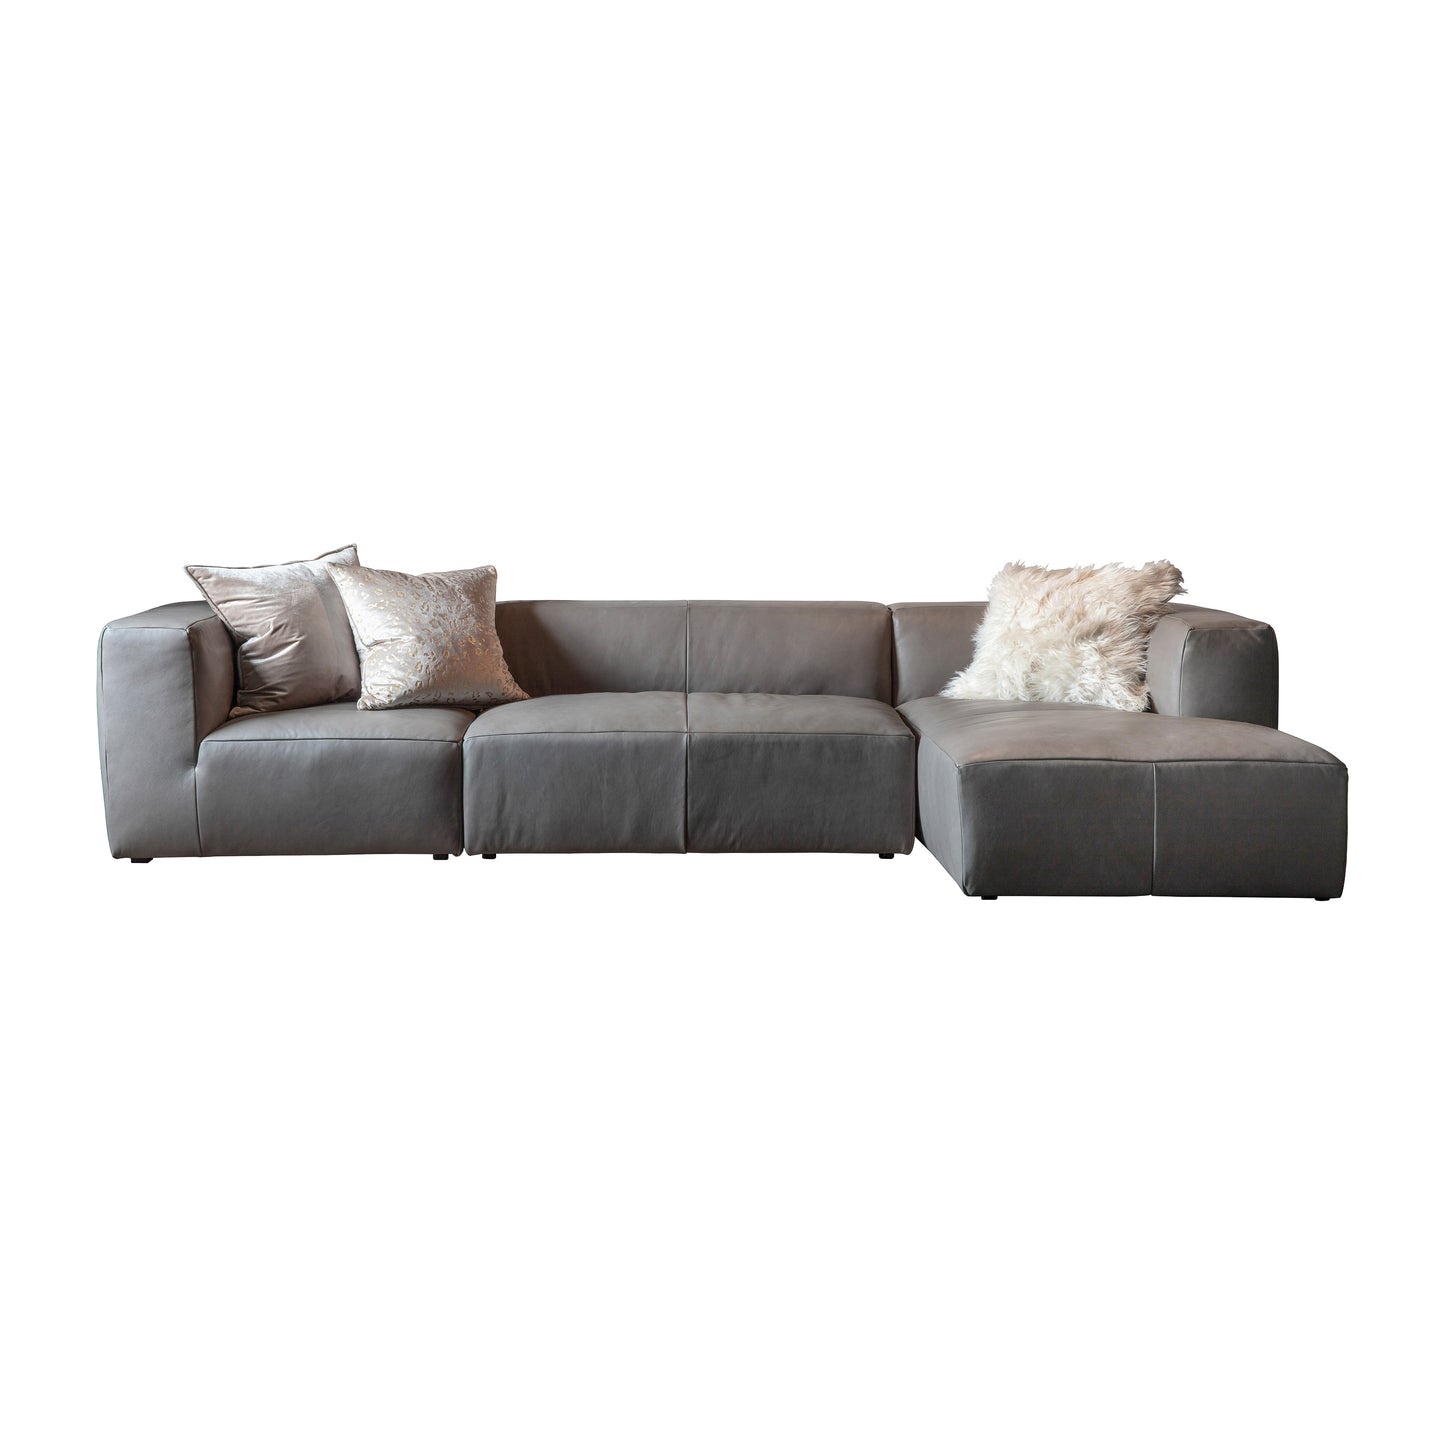 A Ravenna Corner Chaise Grey Leather sectional sofa with pillows for stylish home furniture.